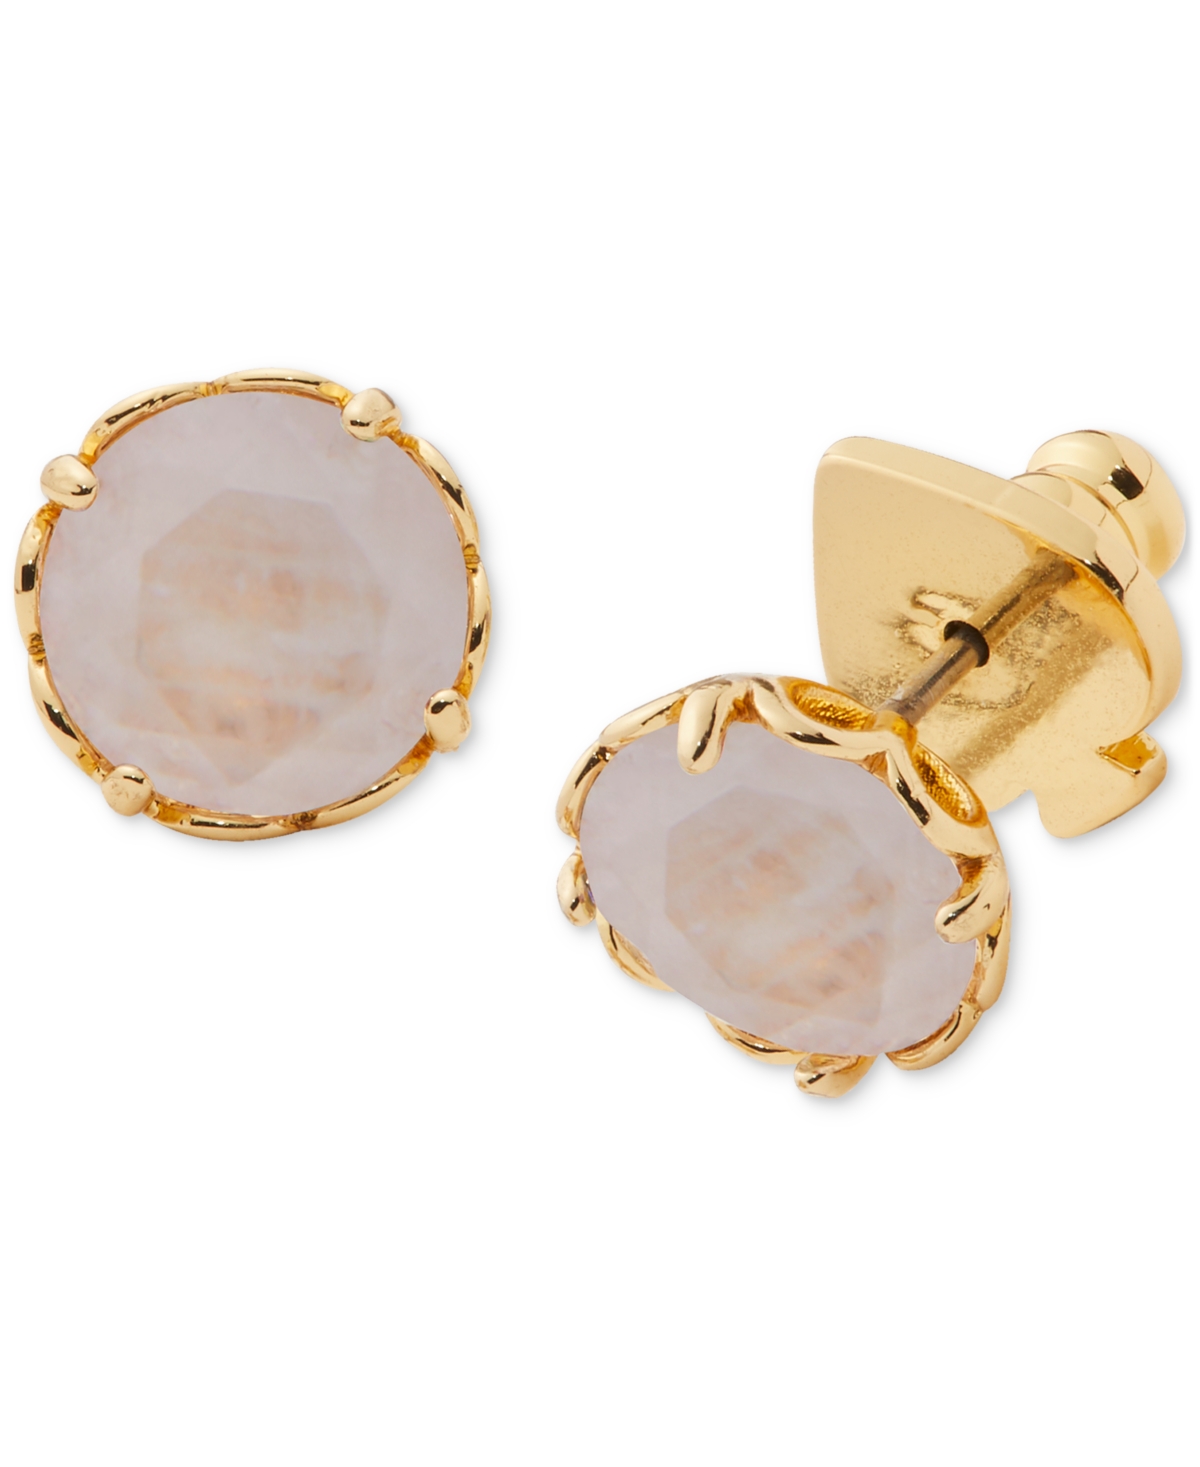 Gold-Tone Color Cubic Zirconia Stud Earrings - Acetate White Mop/gold